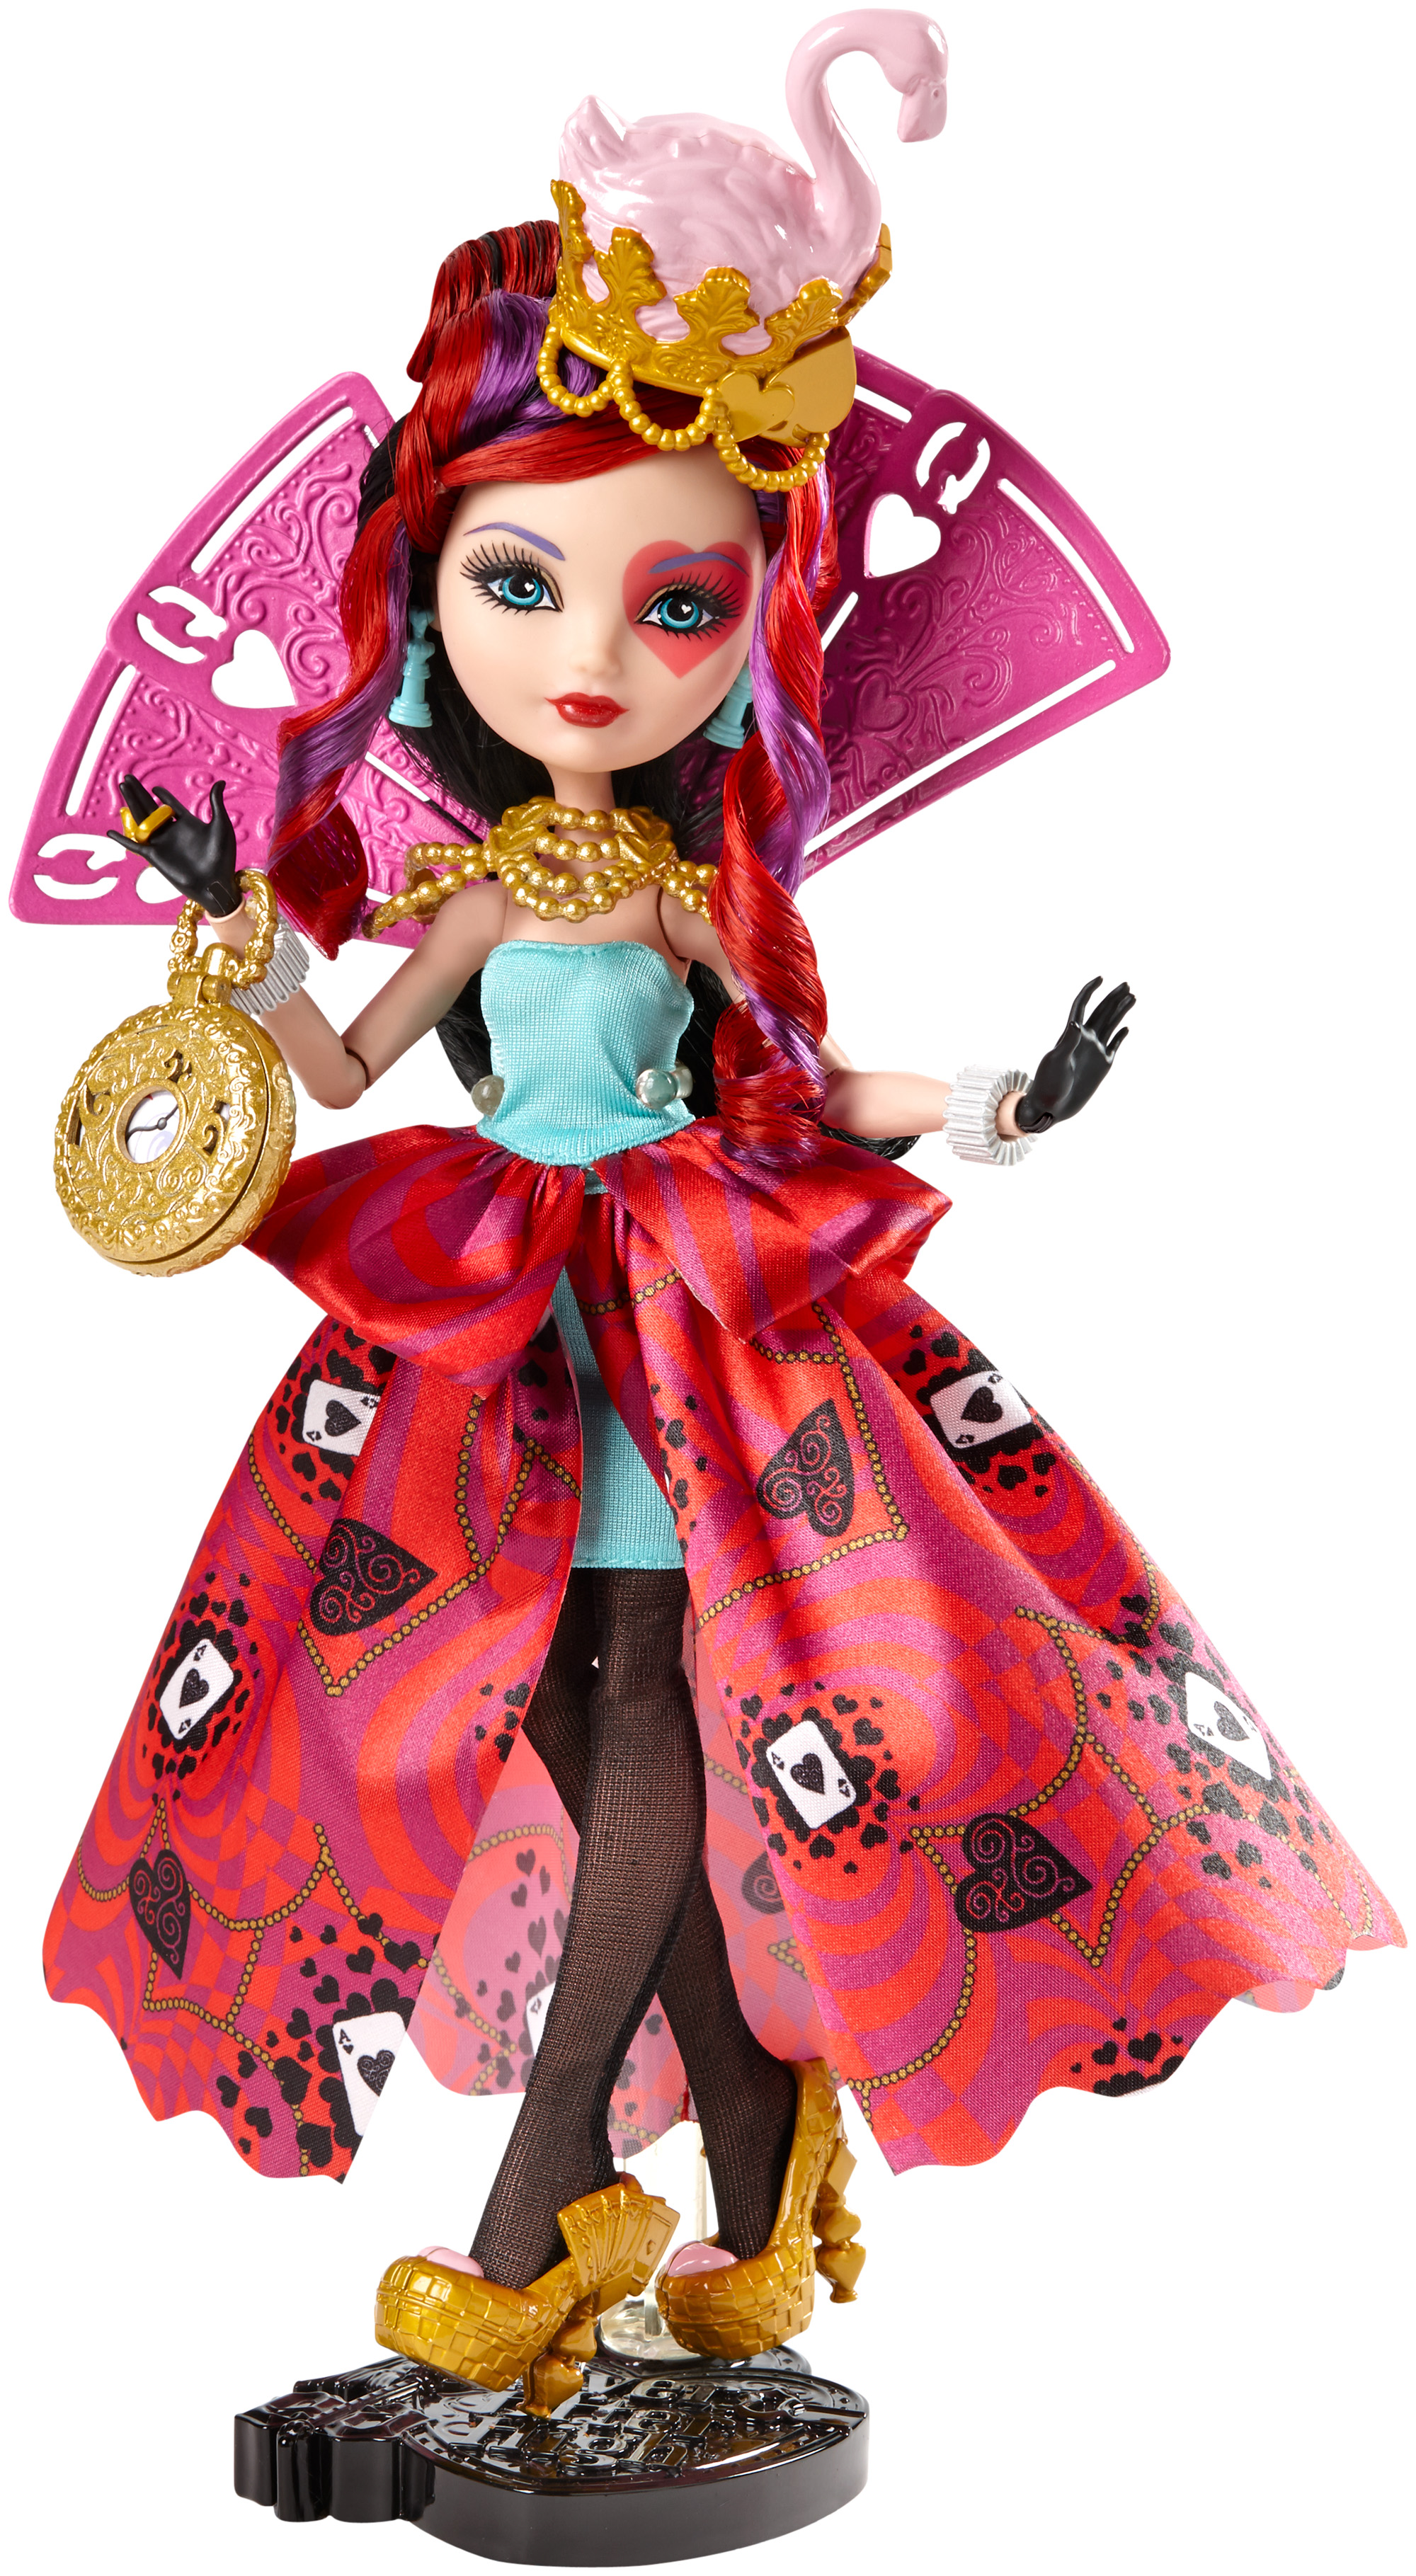 Ever After High Way Too Wonderland Lizzie Hearts Doll 